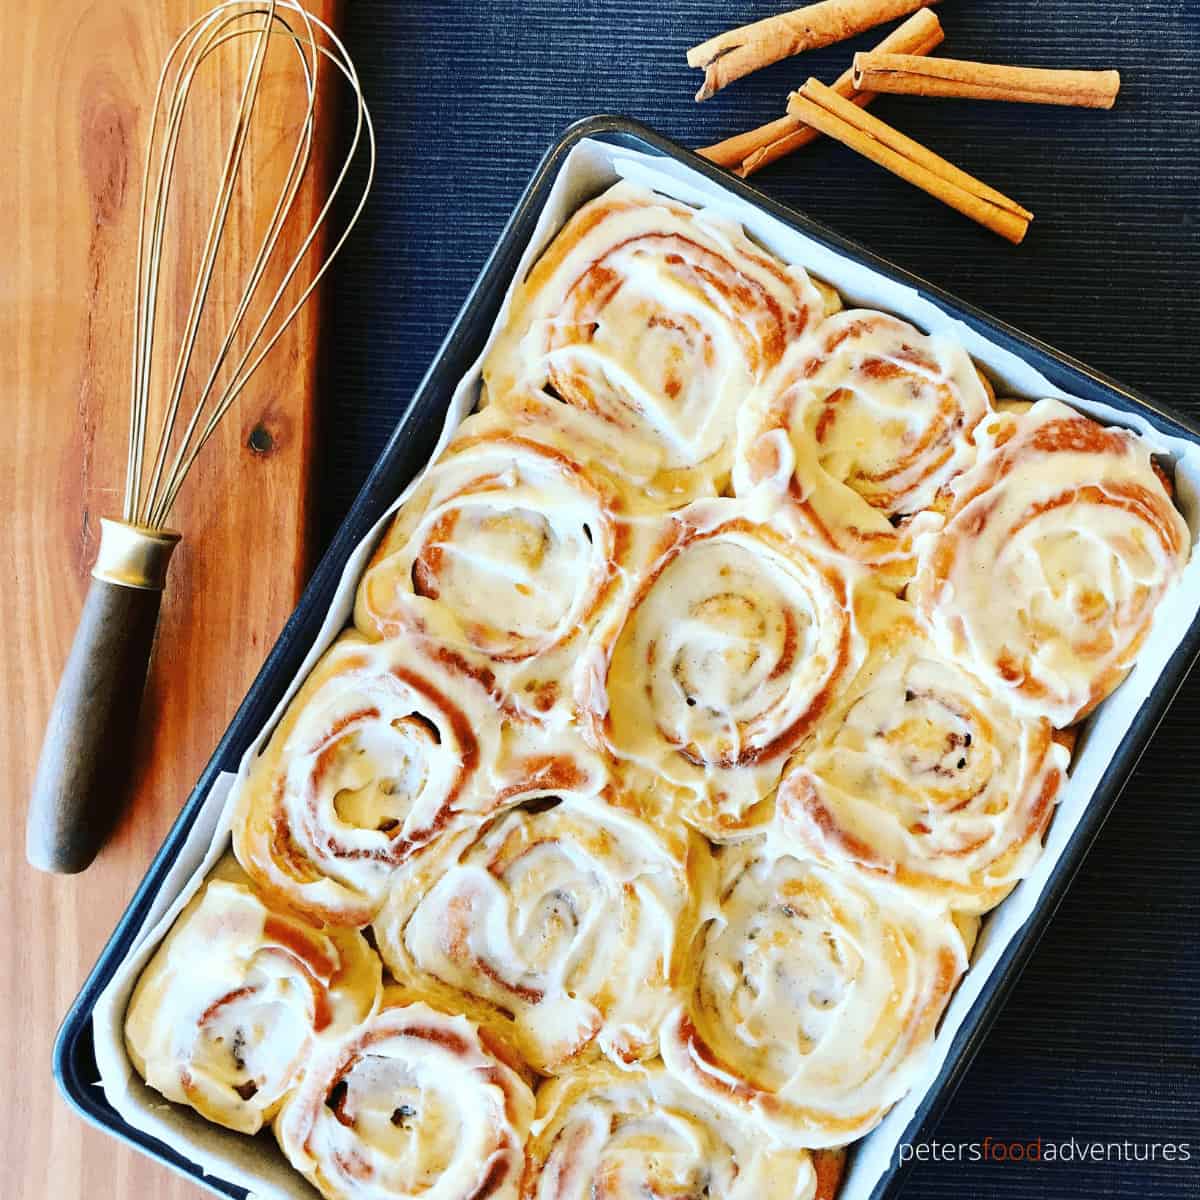 These easy Bread Machine Cinnamon Rolls are perfectly soft and fluffy, generously slathered with a vanilla bean cream cheese frosting. Cinnamon buns that taste like Cinnabon, quick, easy and delicious!